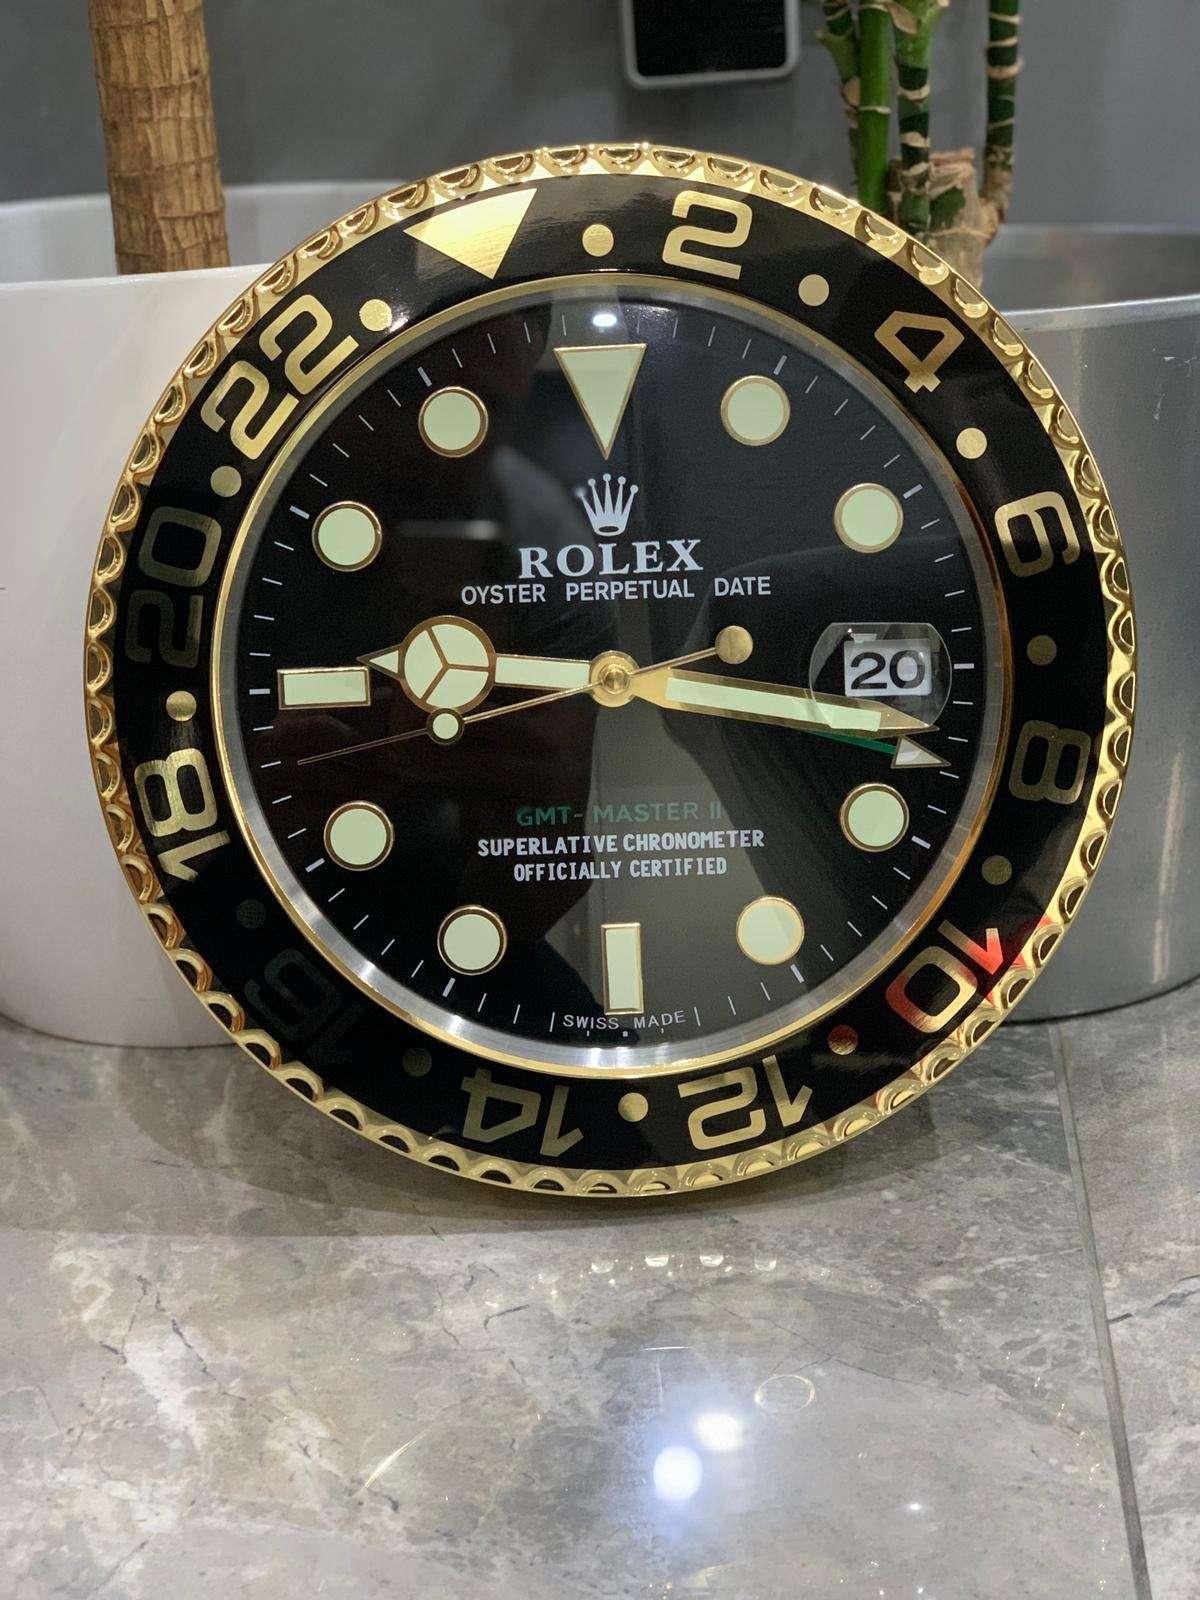 ROLEX Officially Certified Oyster Perpetual Date GMT Master II Wall Clock 
Good condition, working.
Free international shipping.